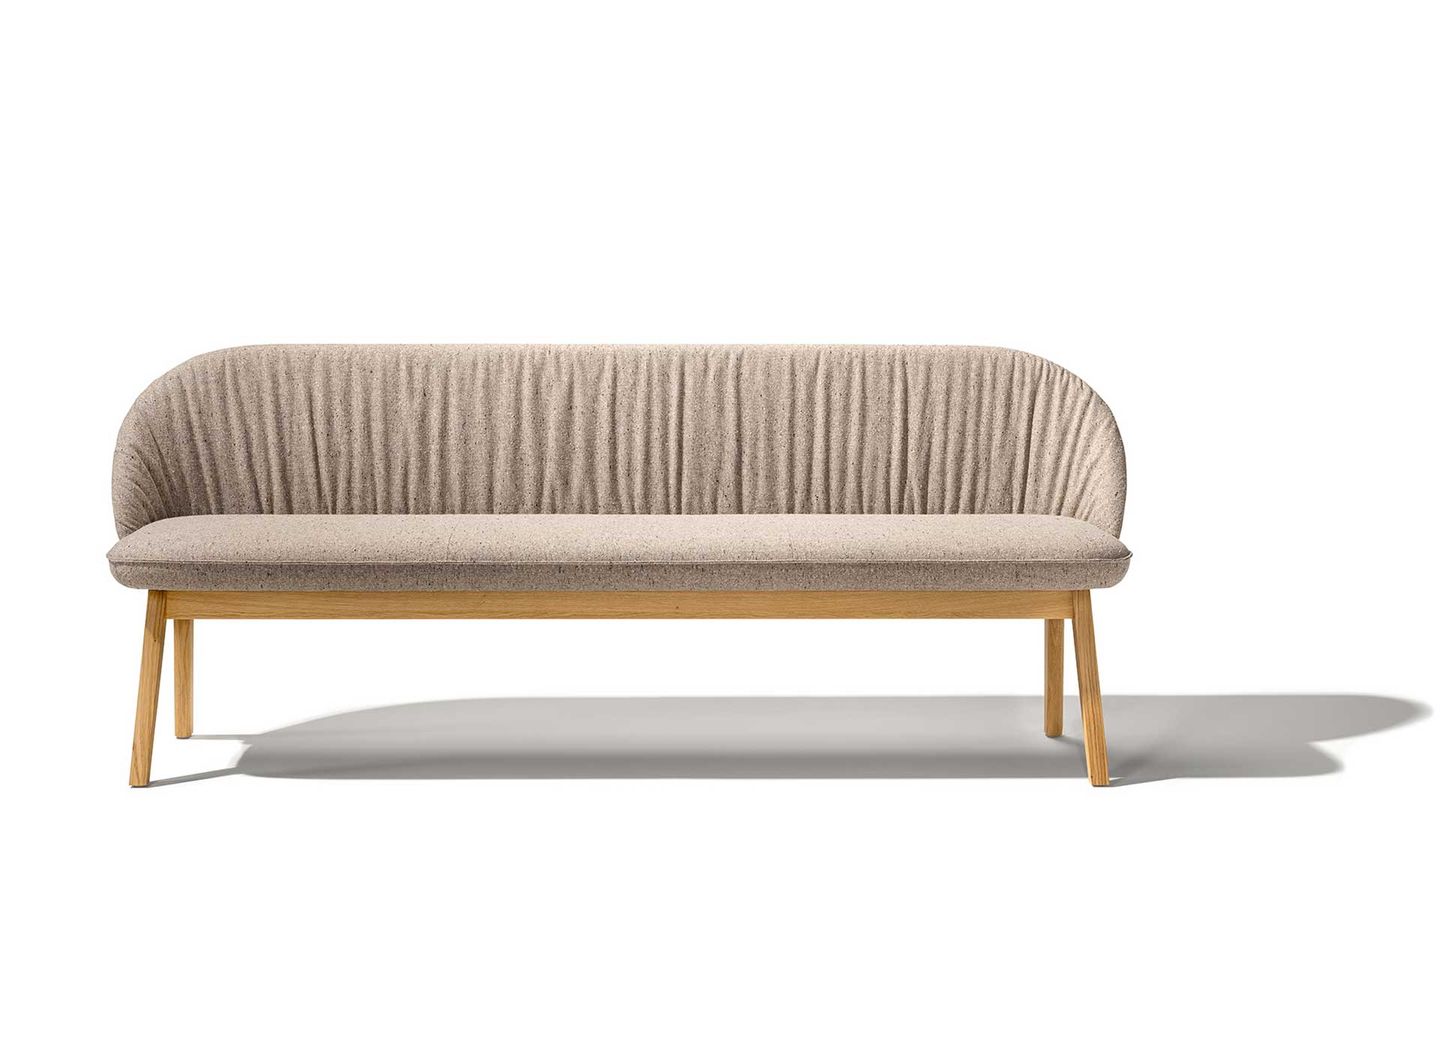 flor bench in oak with Ripley fabric by TEAM 7